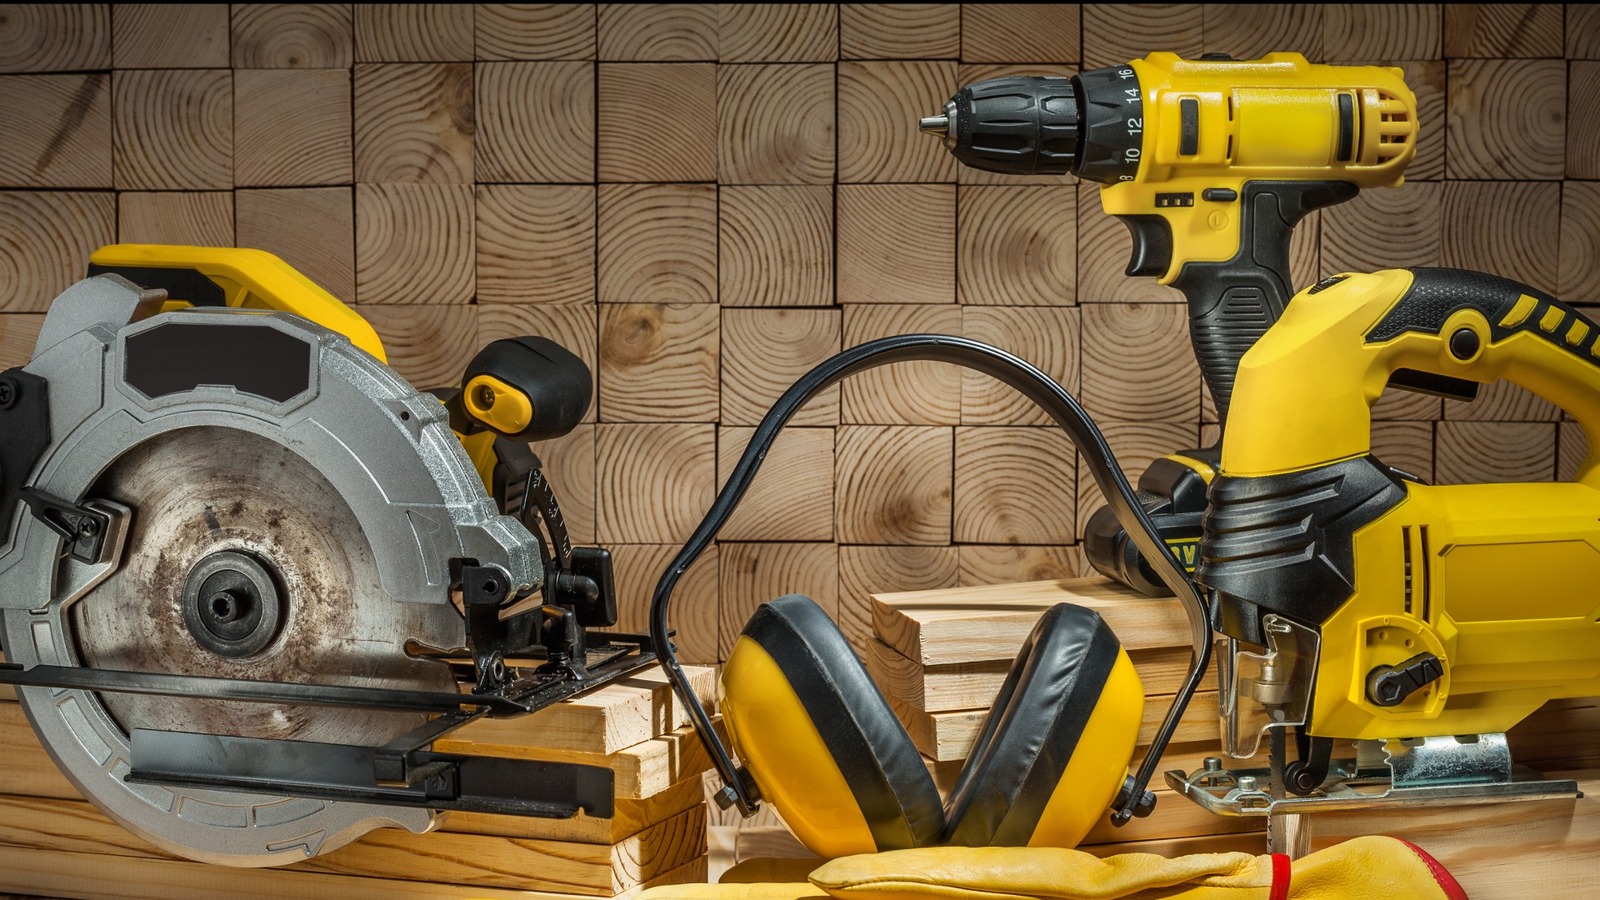 Lowe's Vs. Home Depot: Which Offers The Most Affordable & Reliable Power Tools? thumbnail